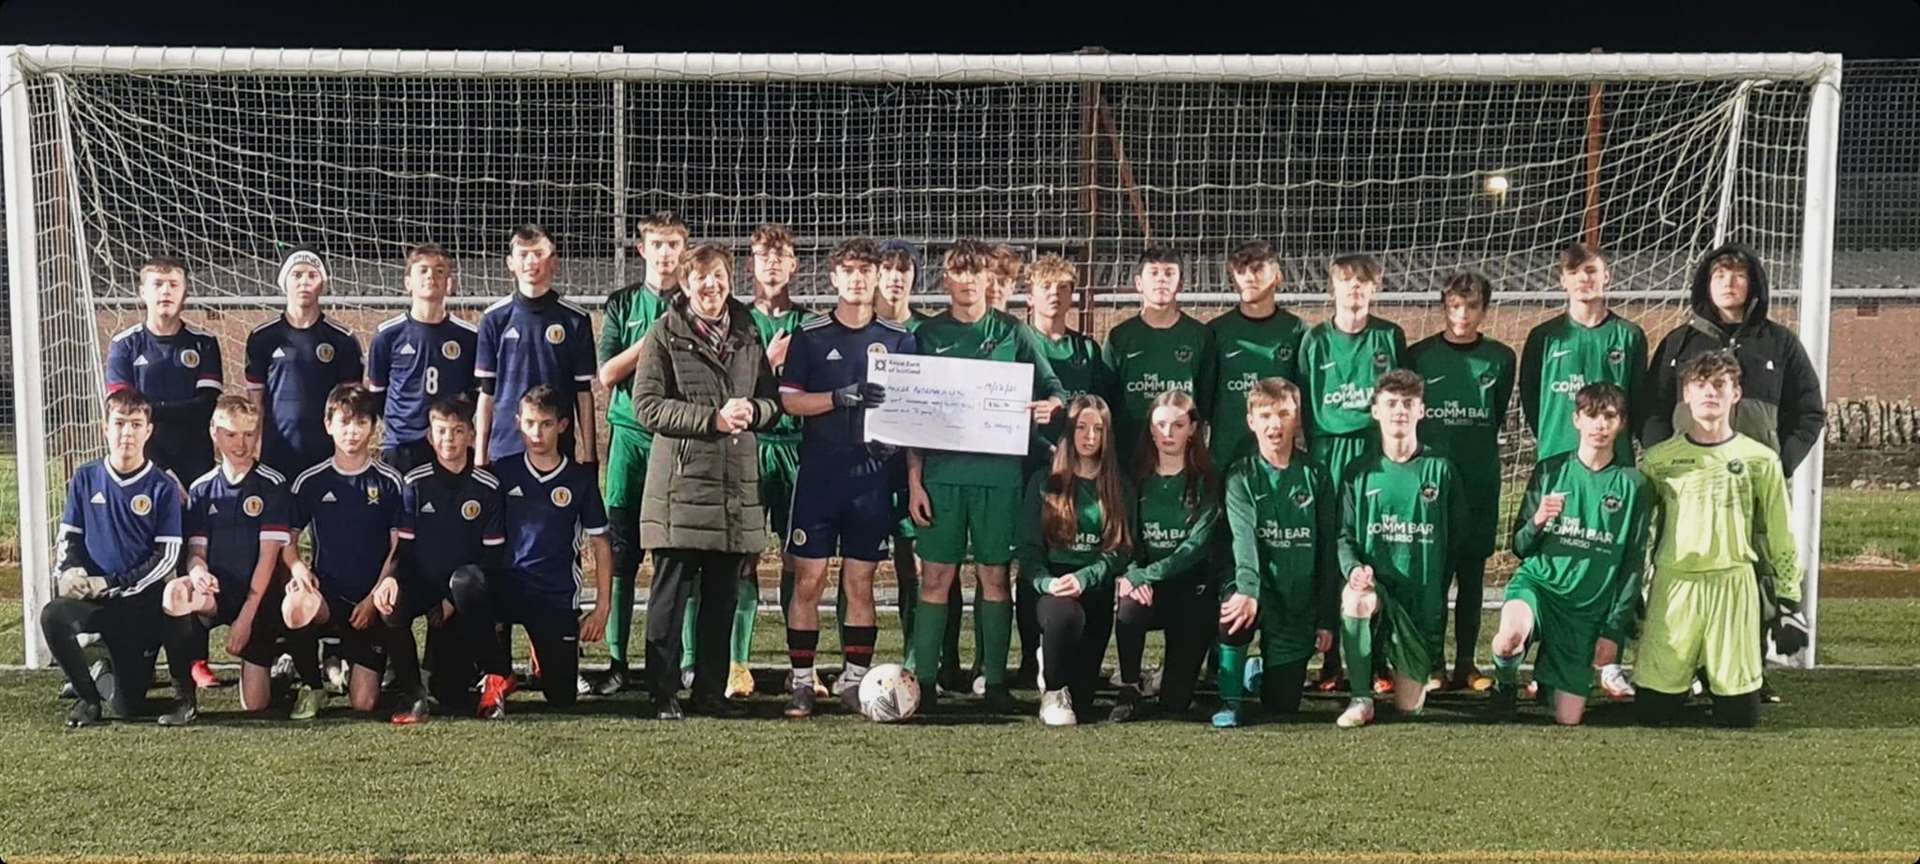 Team captains Euan Kennedy (Barmy Army, in blue) and Liam Giles (Thurso Young Boys, in green) presenting a cheque to Sheila Gunn of Cancer Research UK.